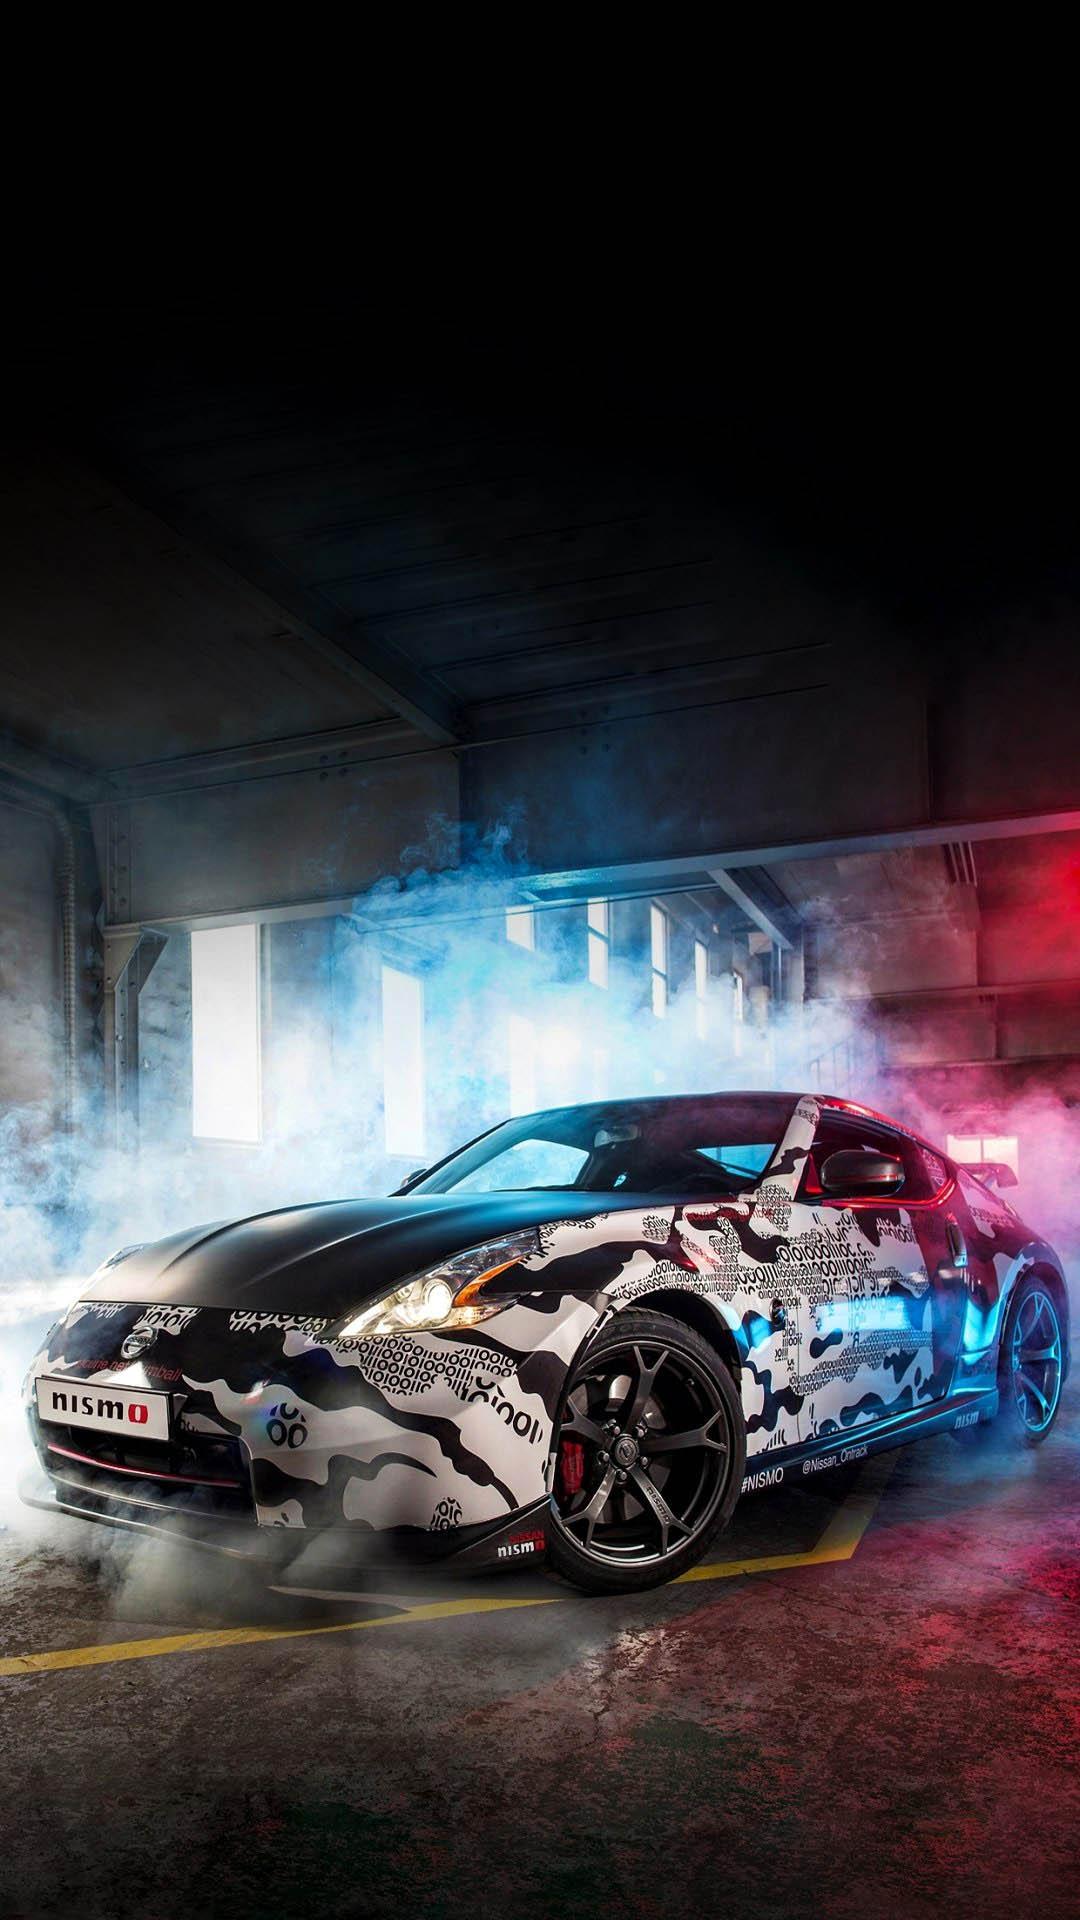 Car Wallpaper (4K Ultra HD) for Android - APK Download